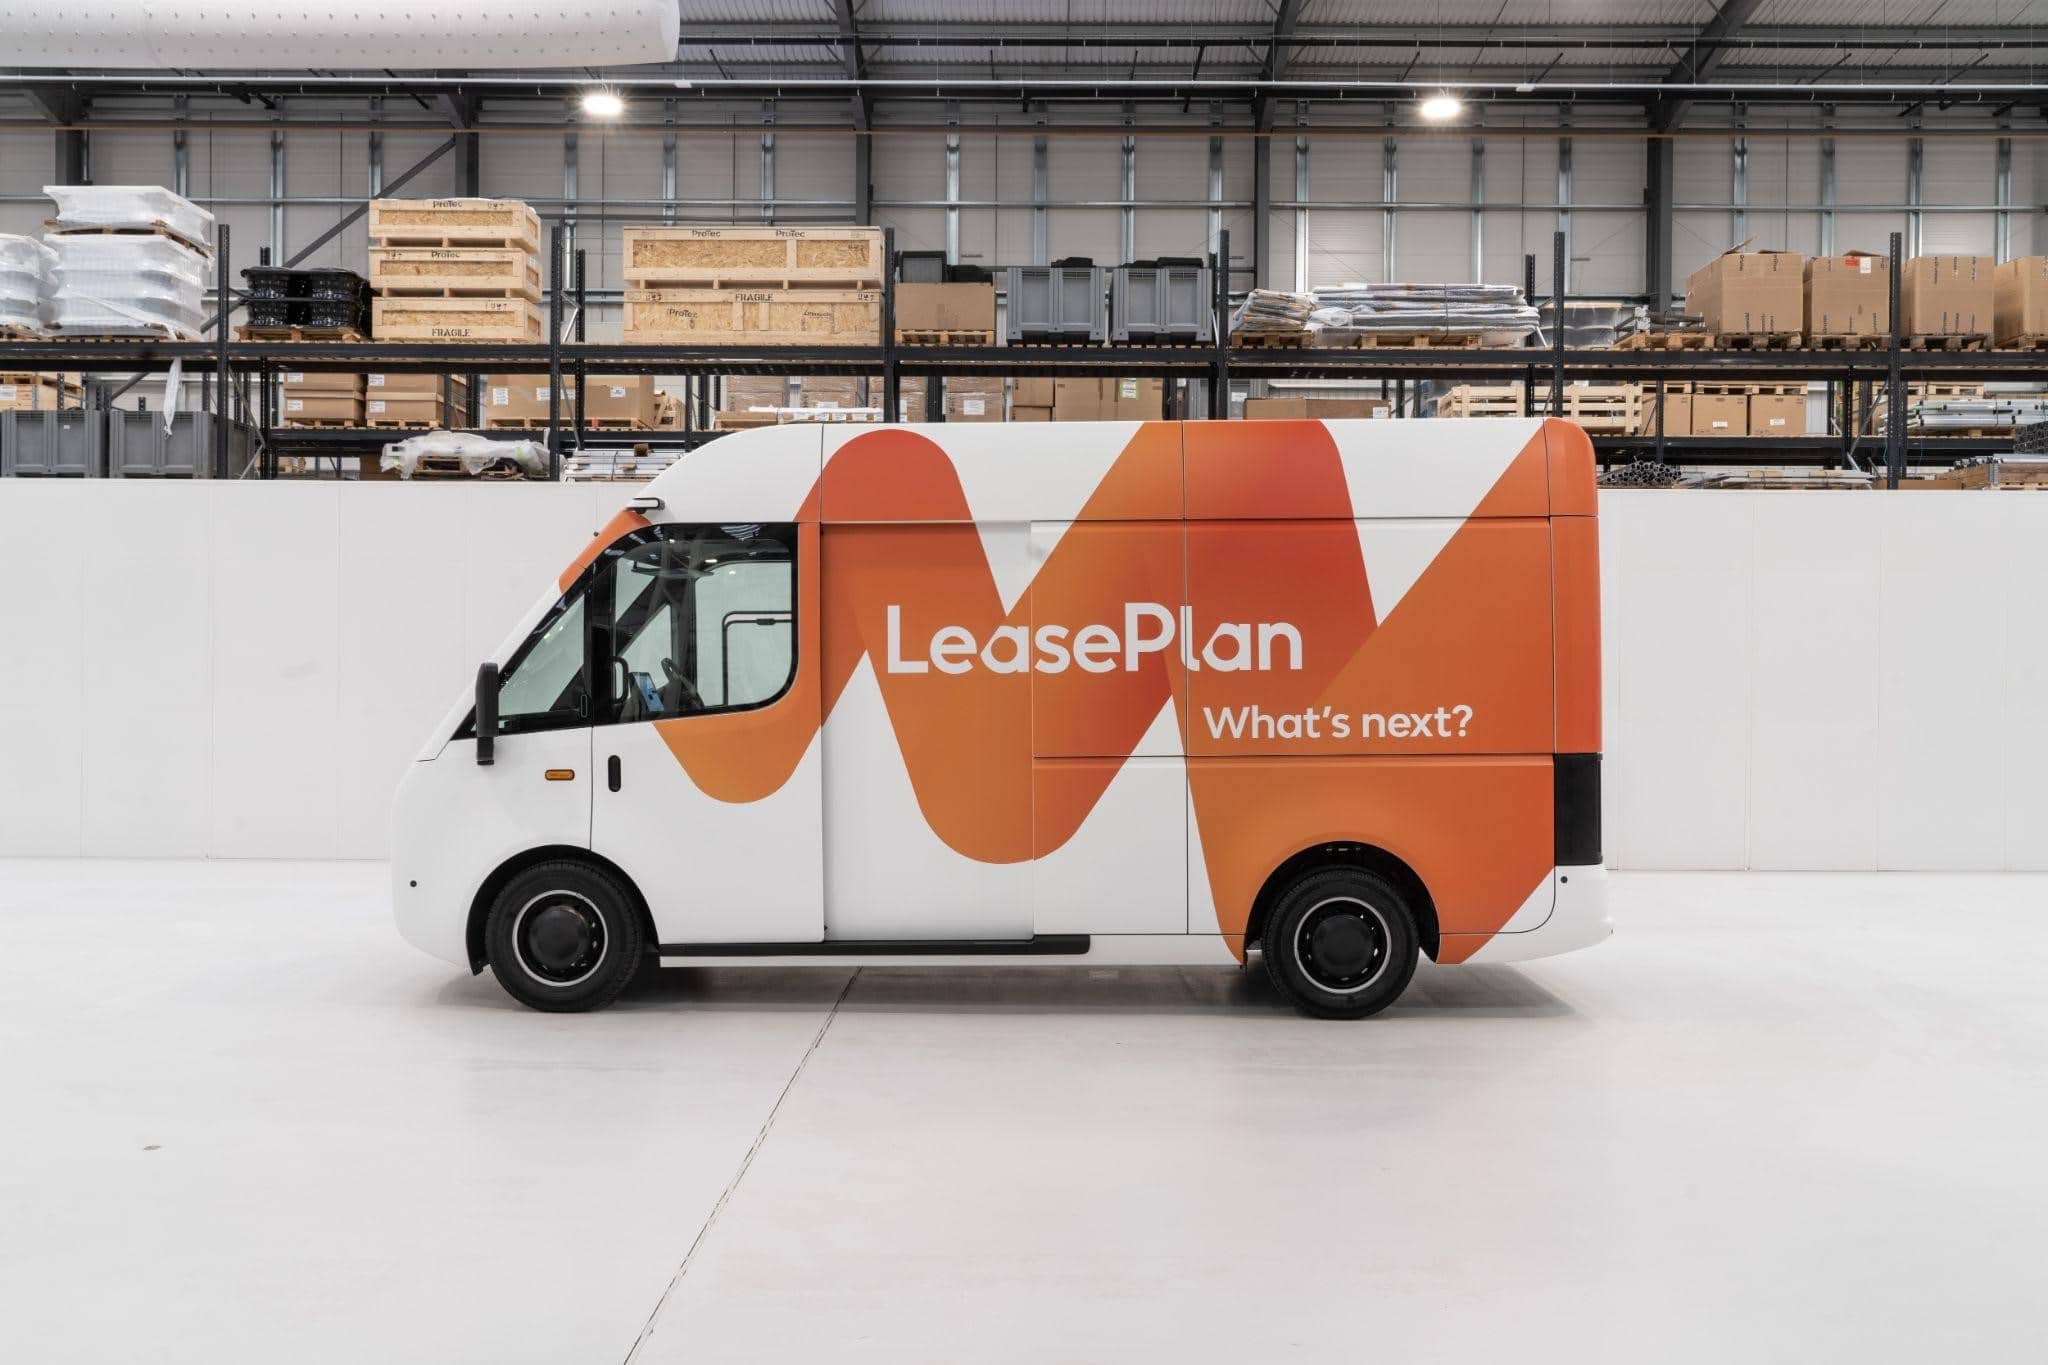 LeasePlan and Arrival sign partnership to bring revolutionary electric vans to European cities